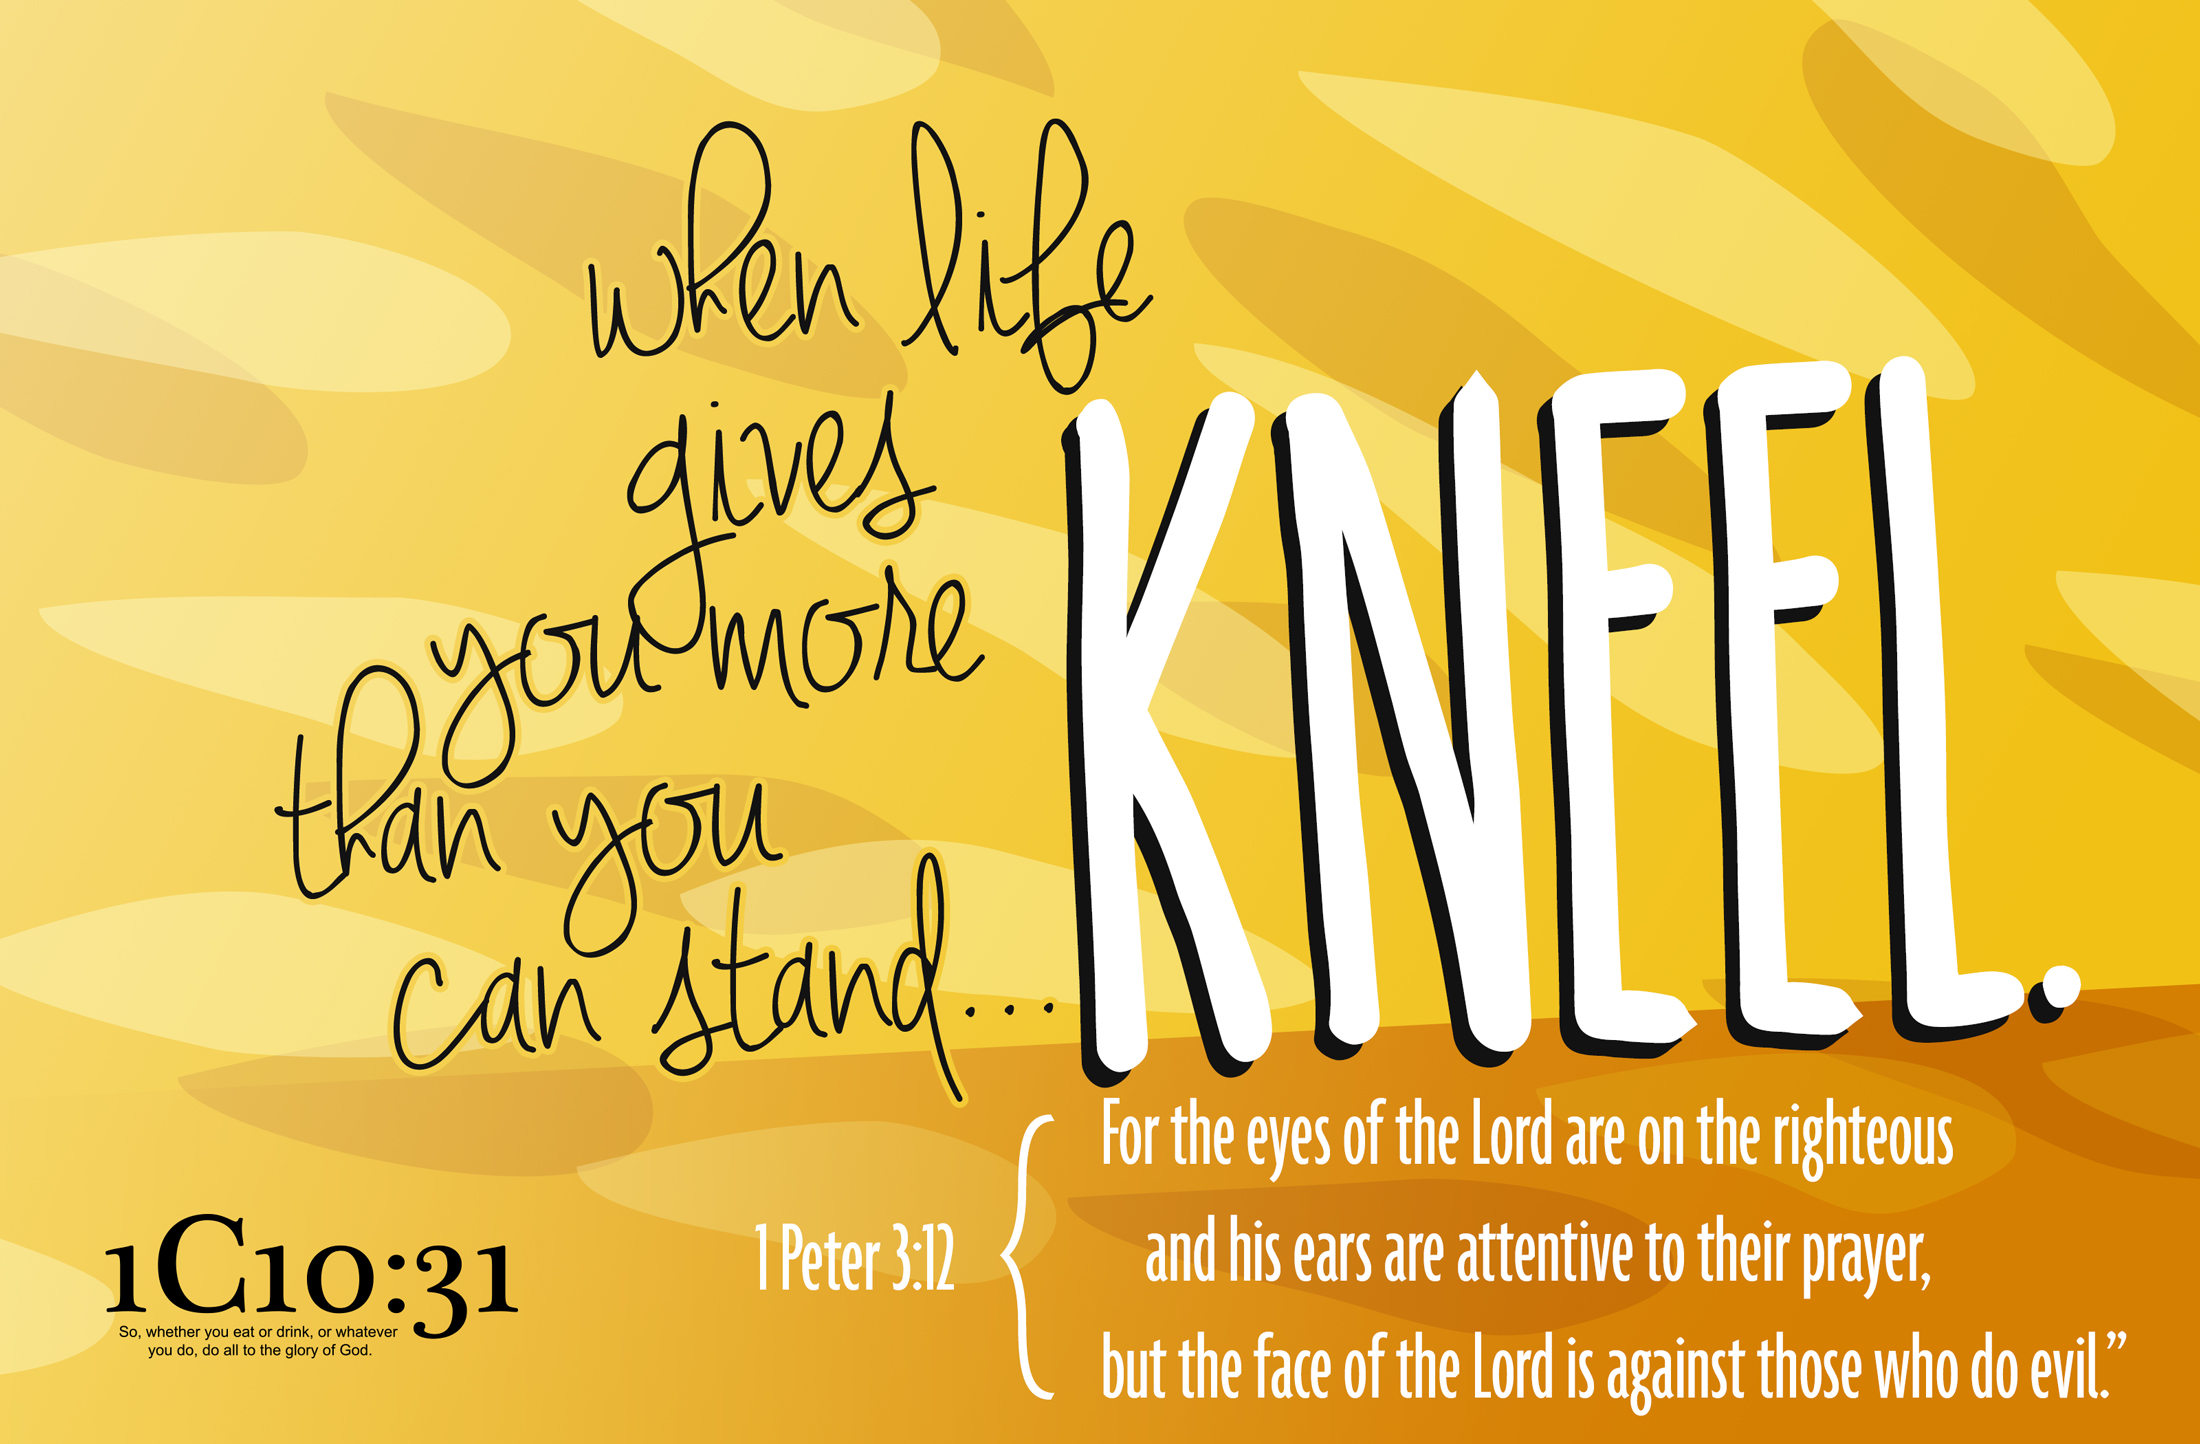 When life gives you more than you can stand... Kneel